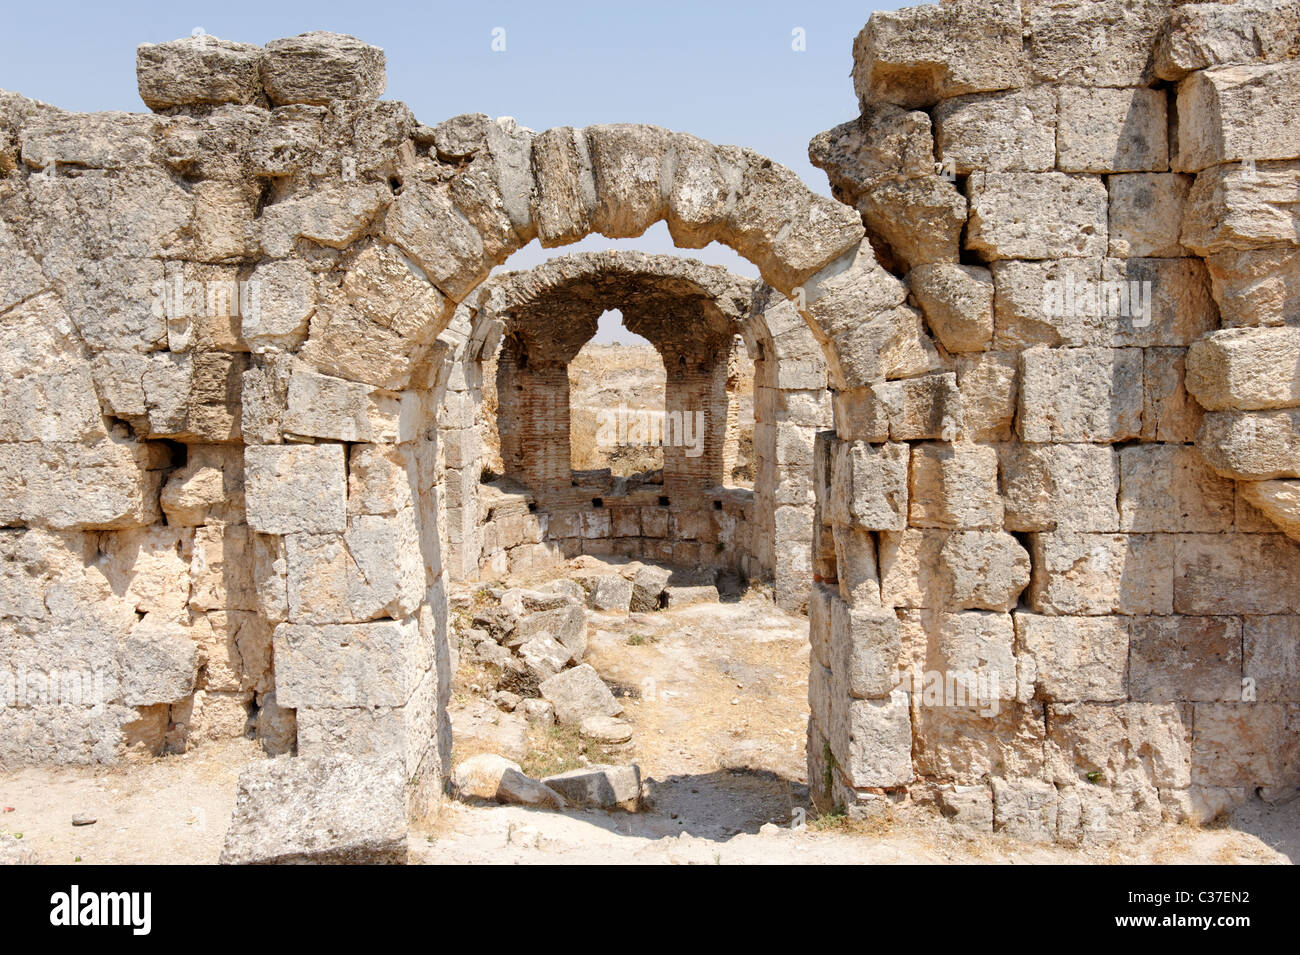 View of the remains of the Agrippa Baths in the Northern section of the ancient city of Apamea Stock Photo